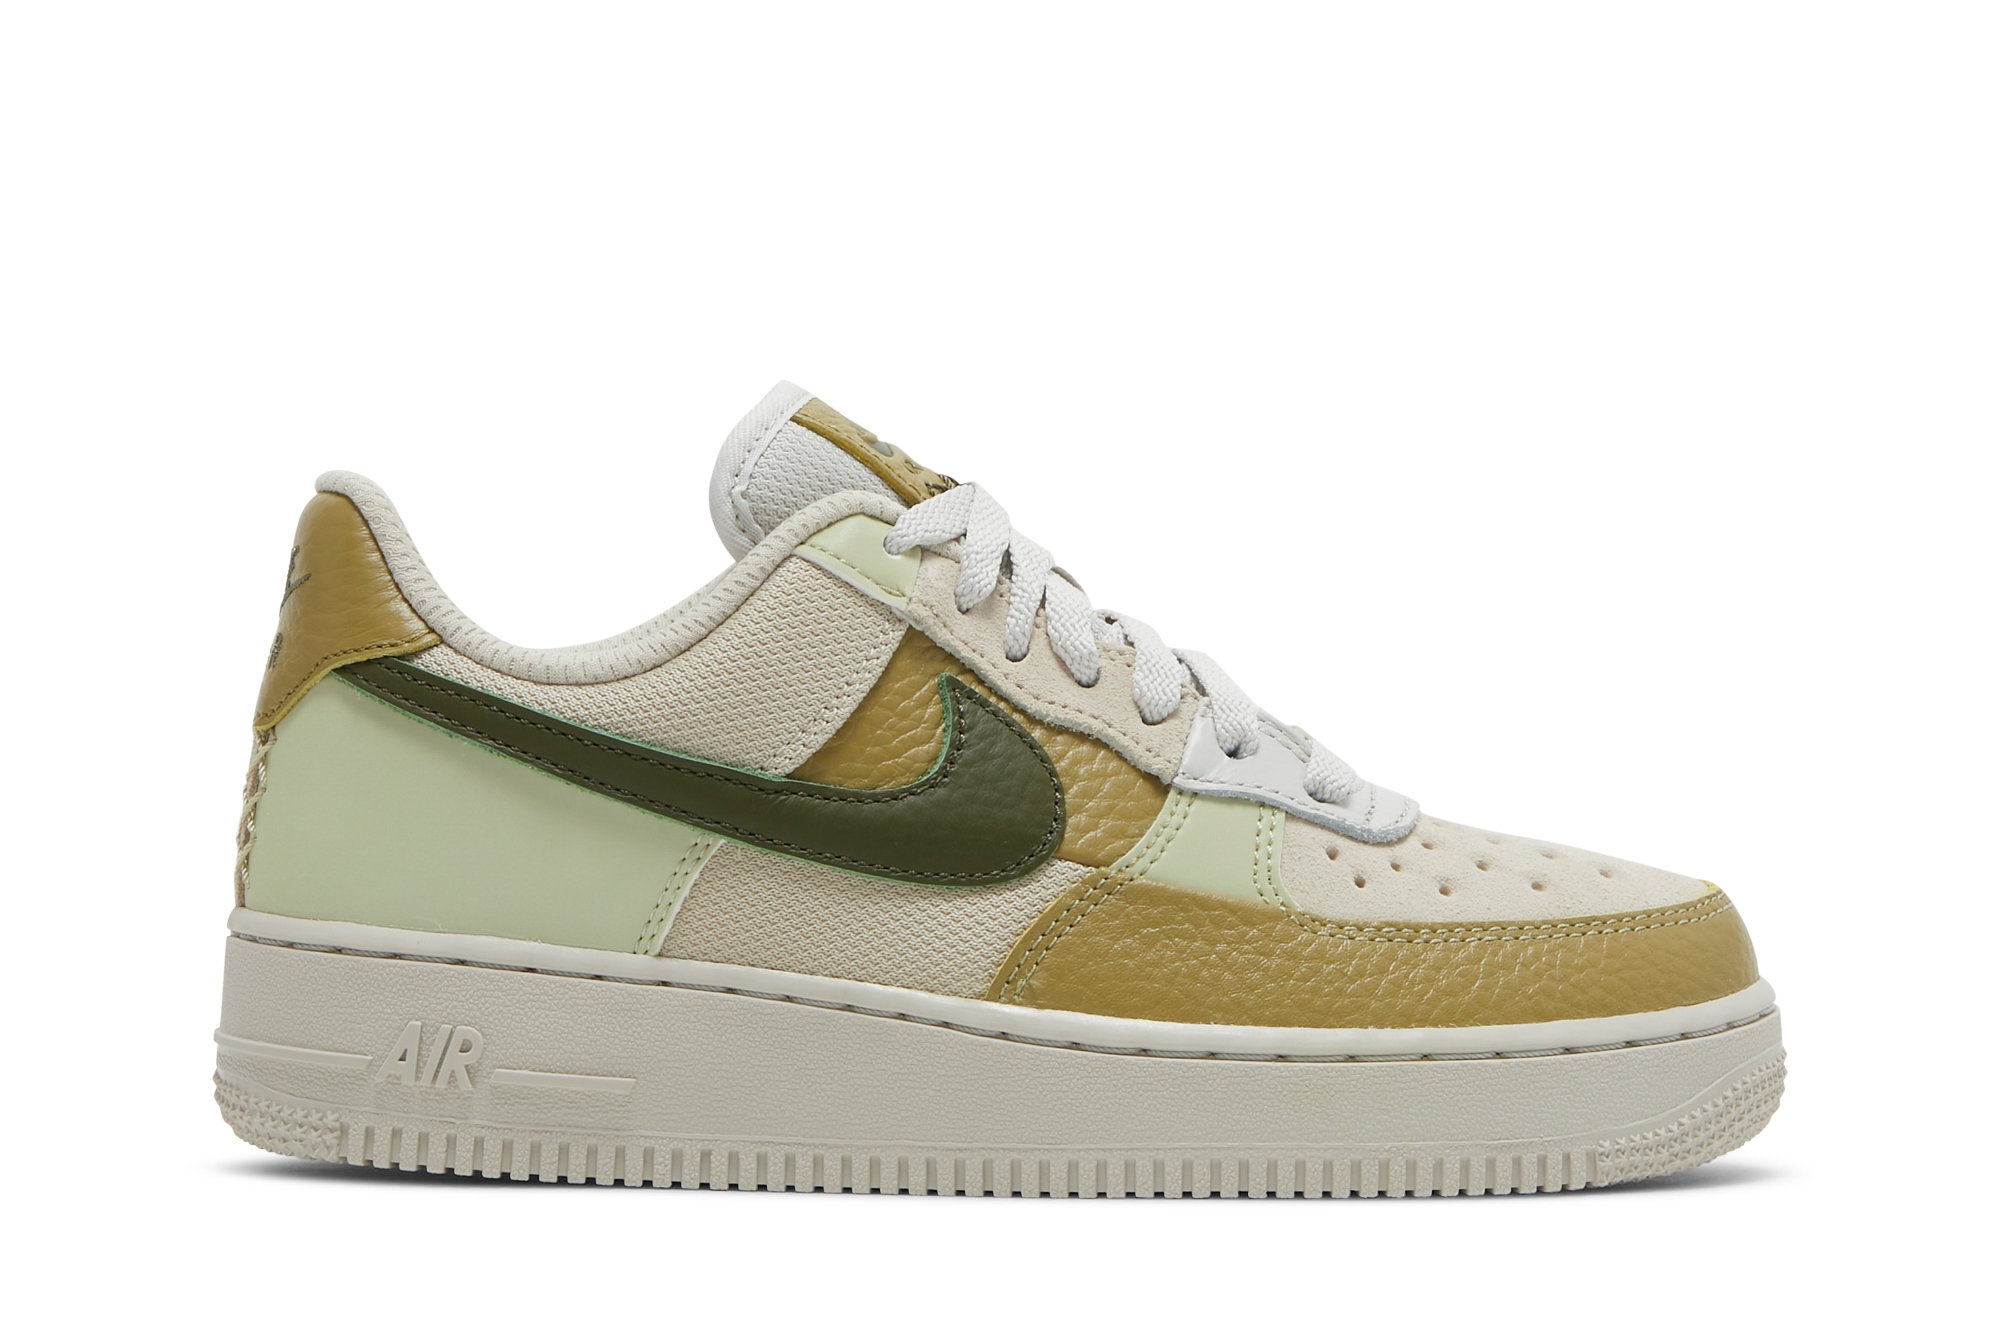 NIKE WMNS AIR FORCE 1 LOW Green Muslin スニーカー 【新品、本物、当店在庫だから安心】